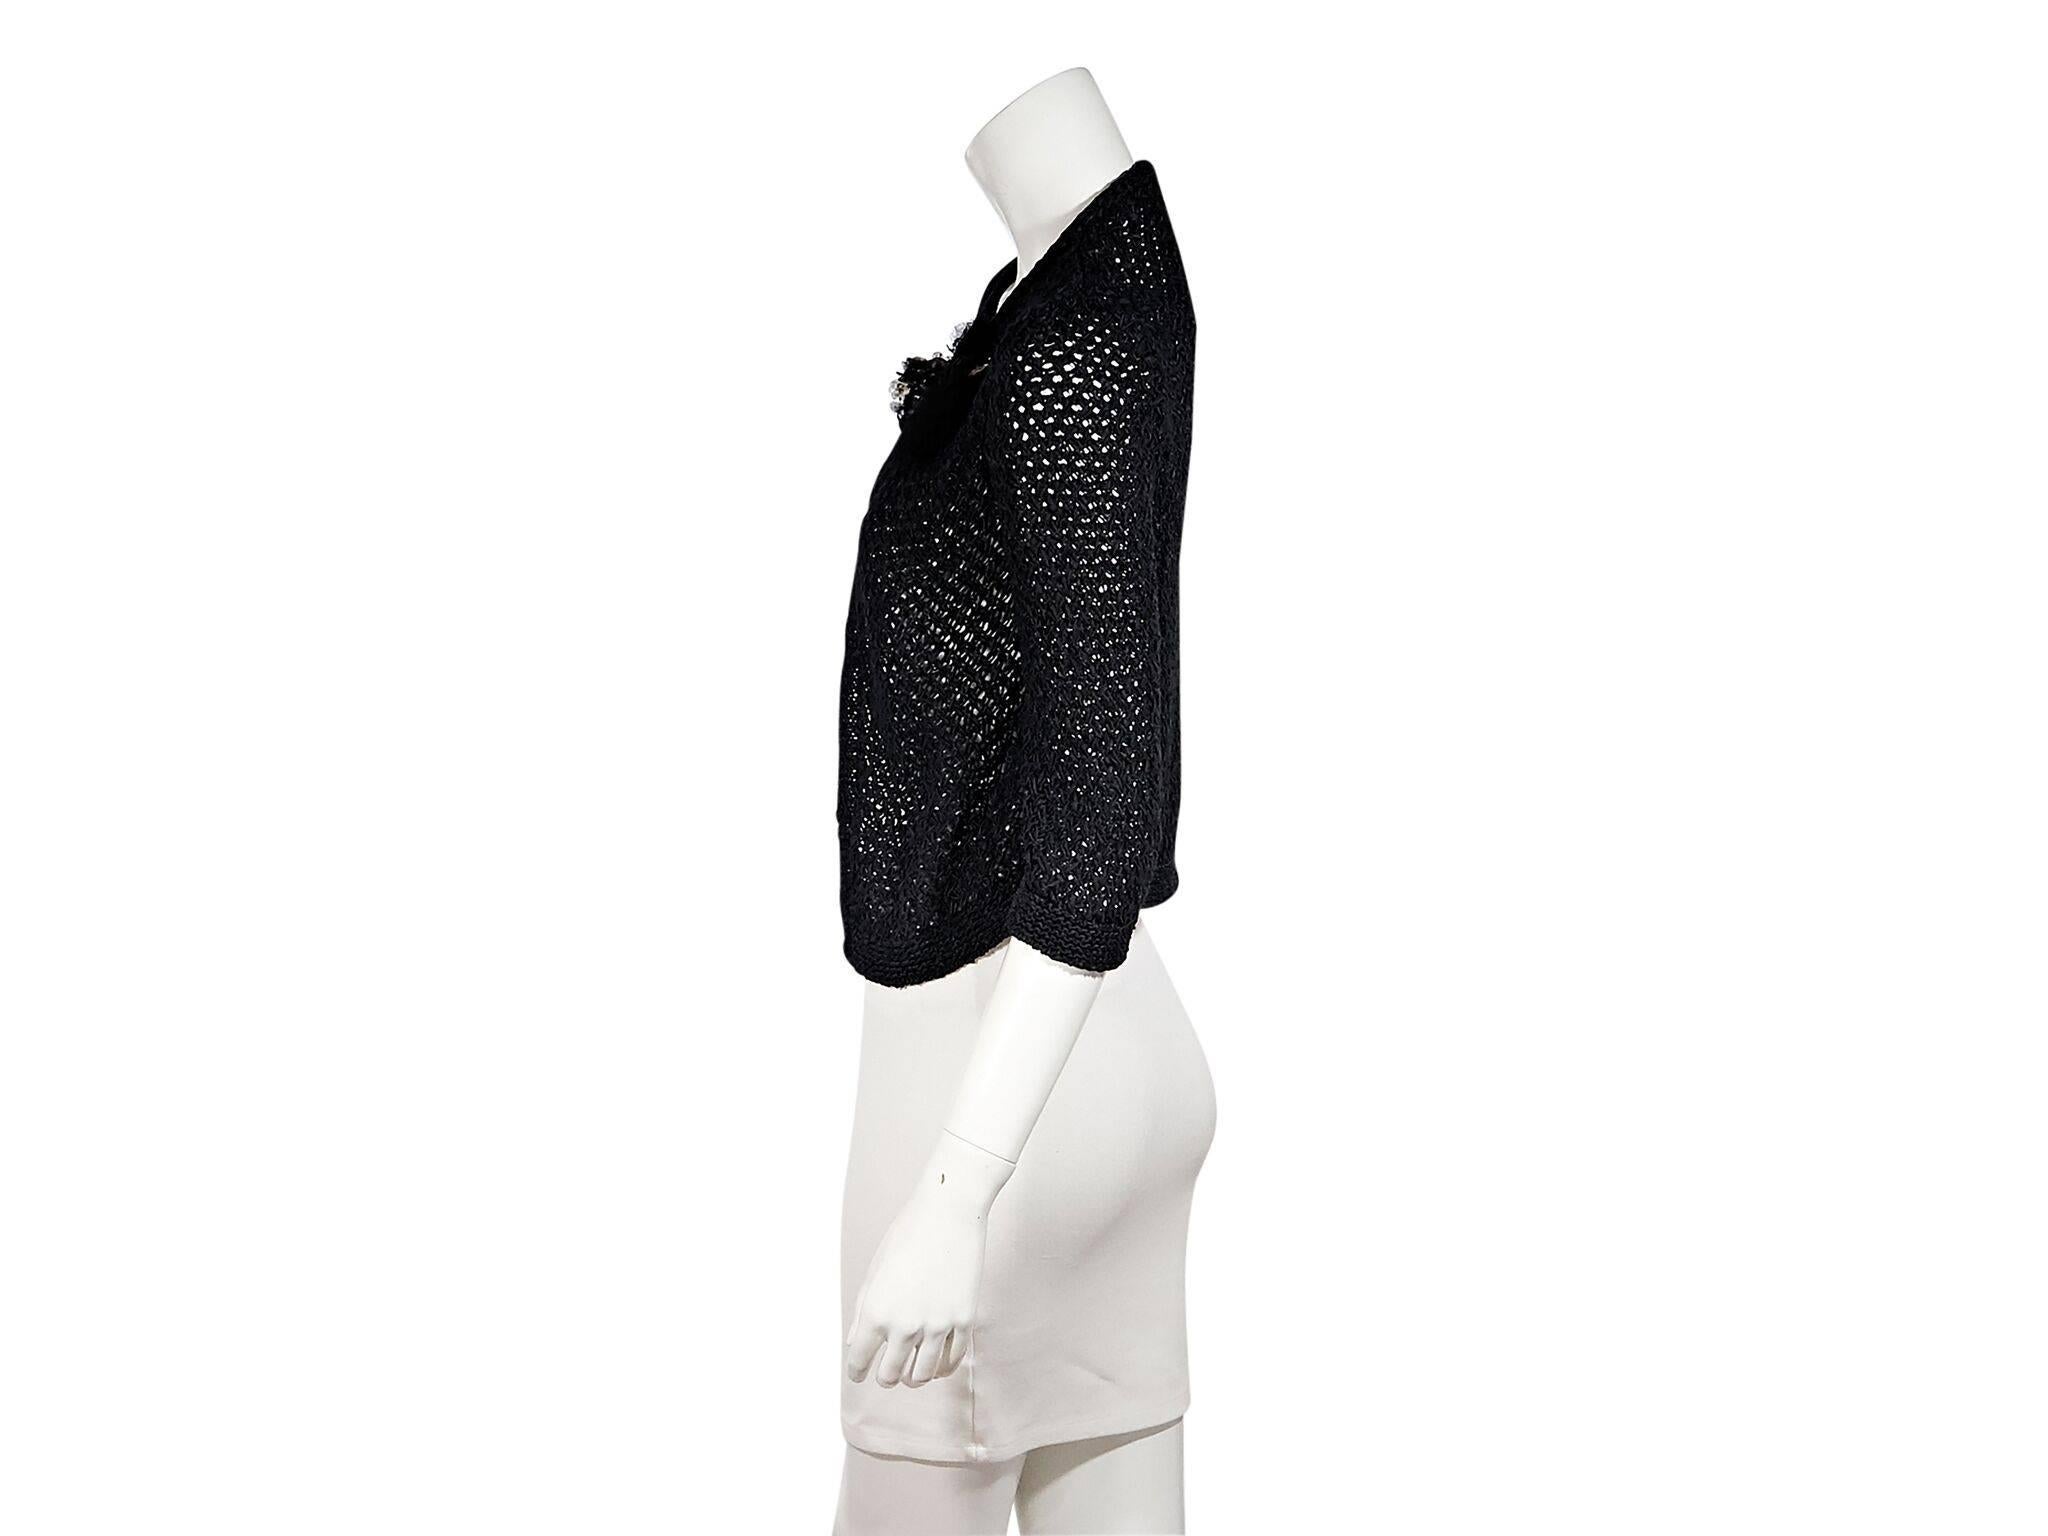 Product details:  Black woven cardigan by Chanel.  Accented with a floral pin.  Elbow-length sleeves.  Chain tie closure.  42